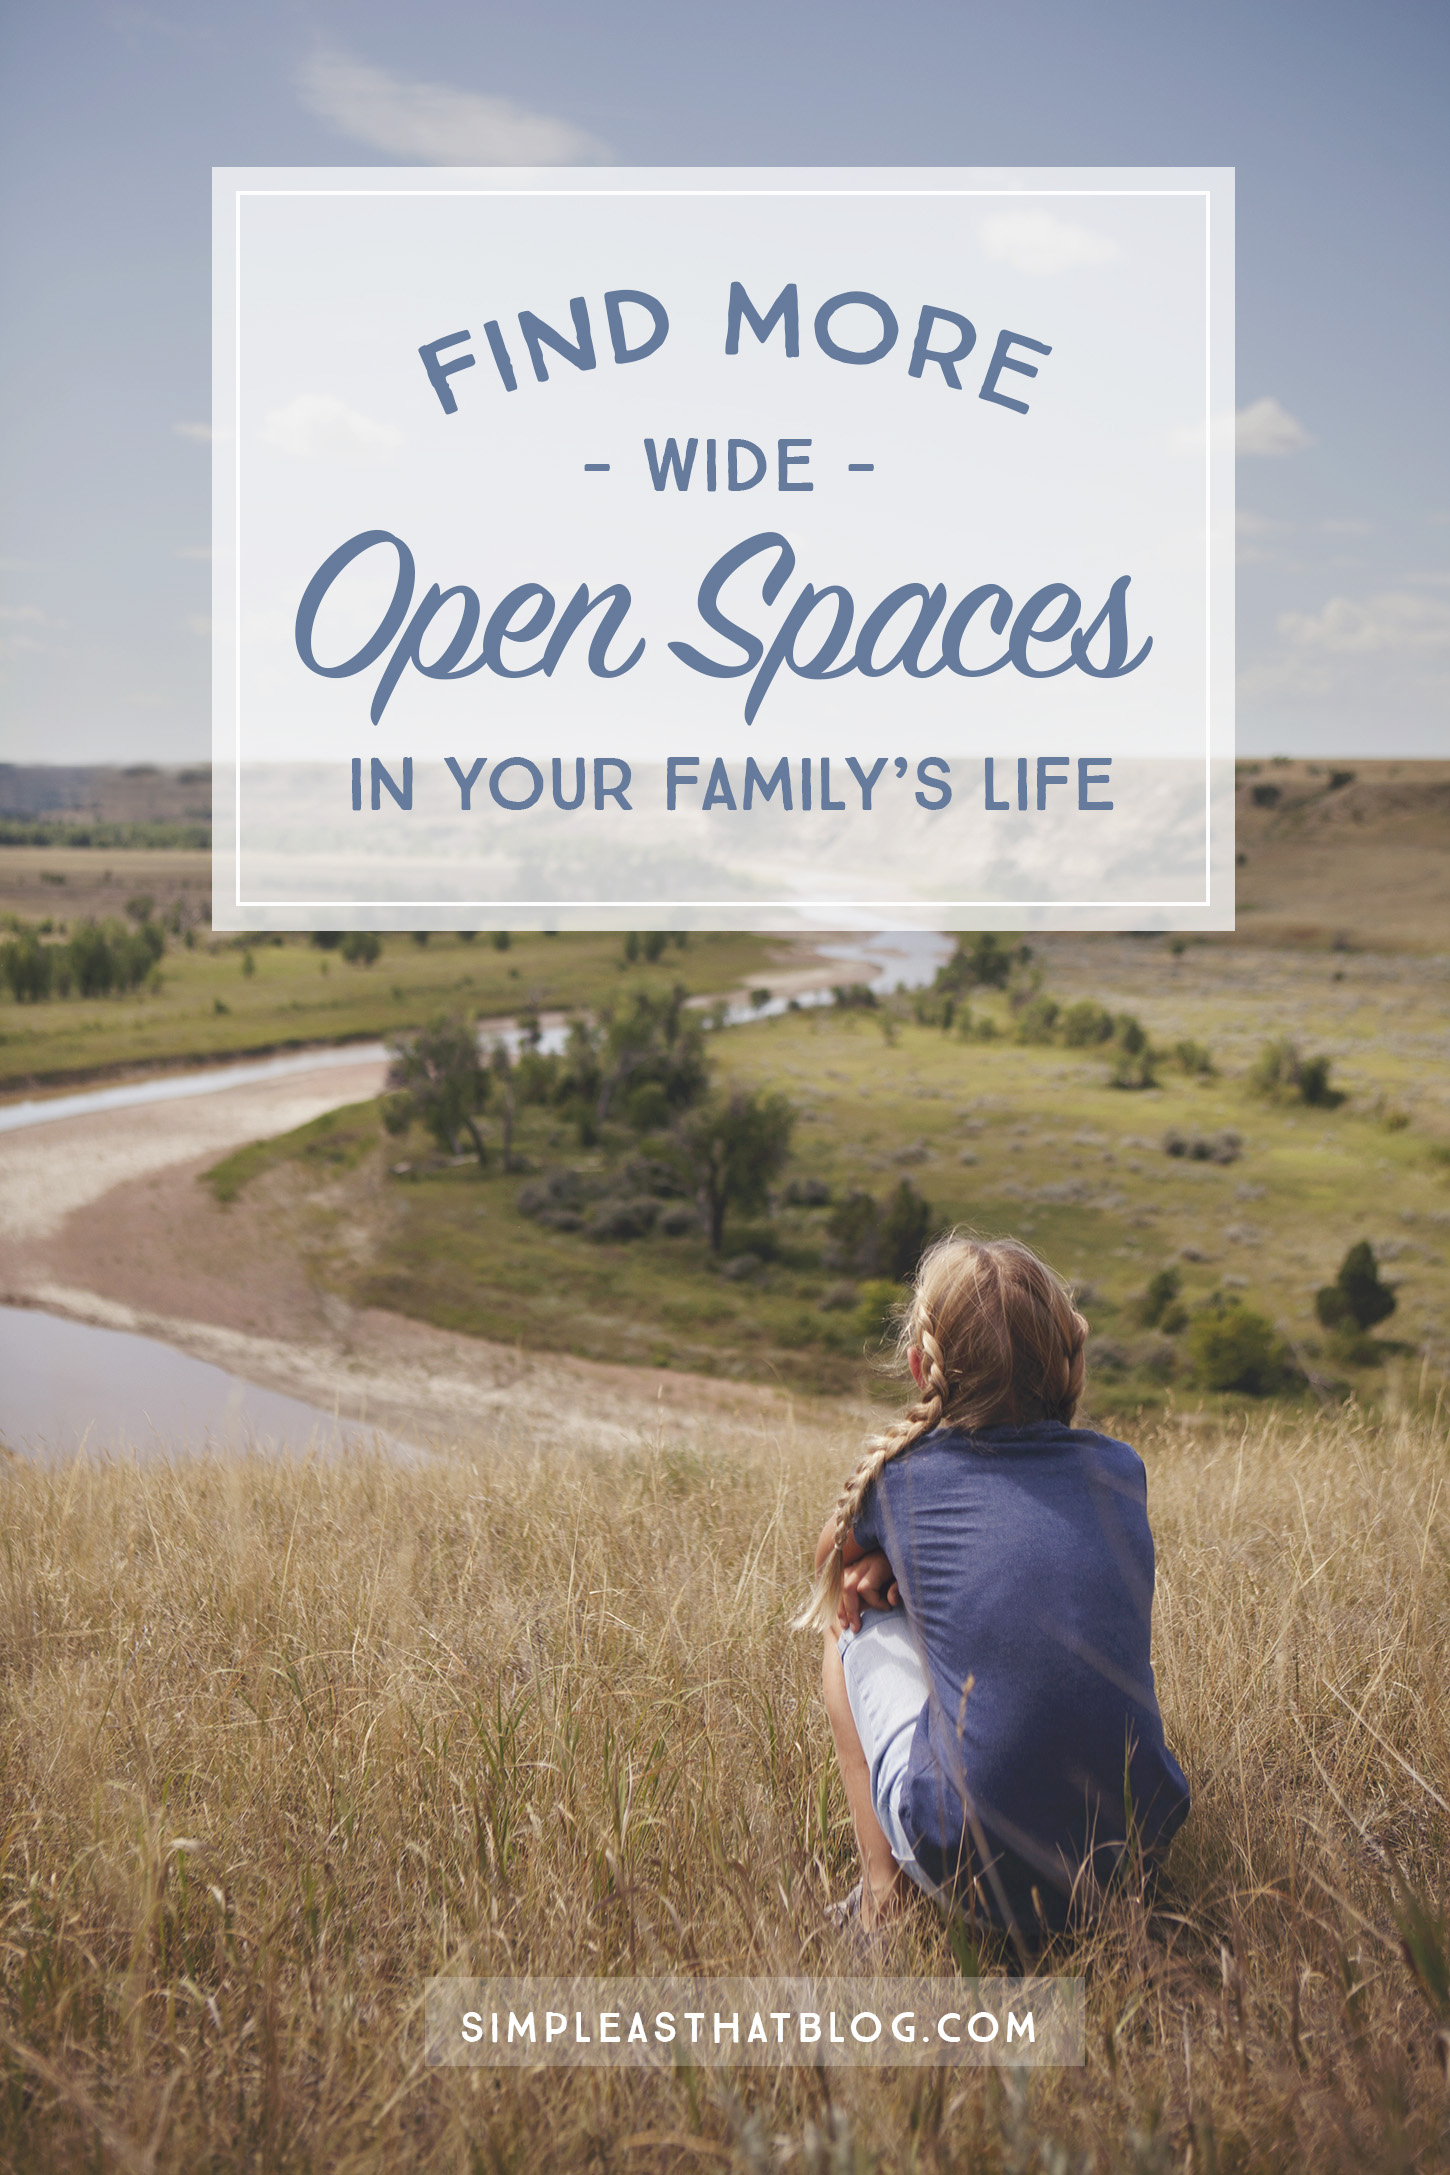 We all want less time spent on things of little significance... But how? 10 Ways to Find More Wide Open Spaces in Your Family's Life.